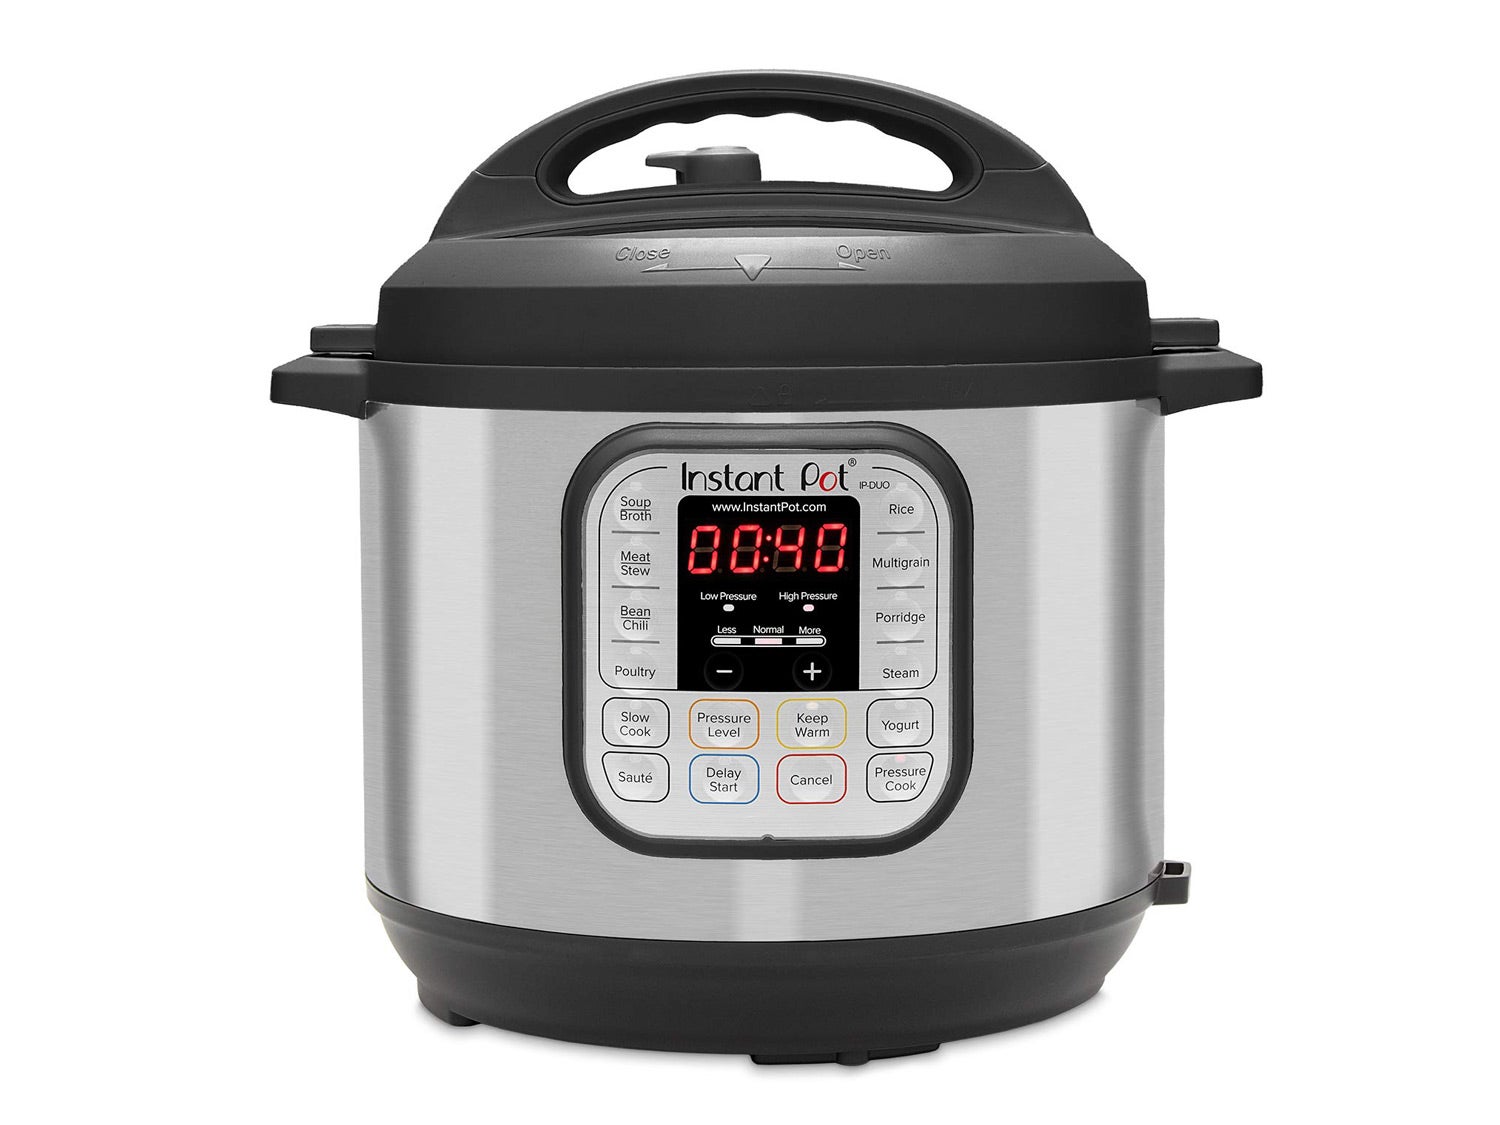 3 Features You Need in Your Next Slow Cooker